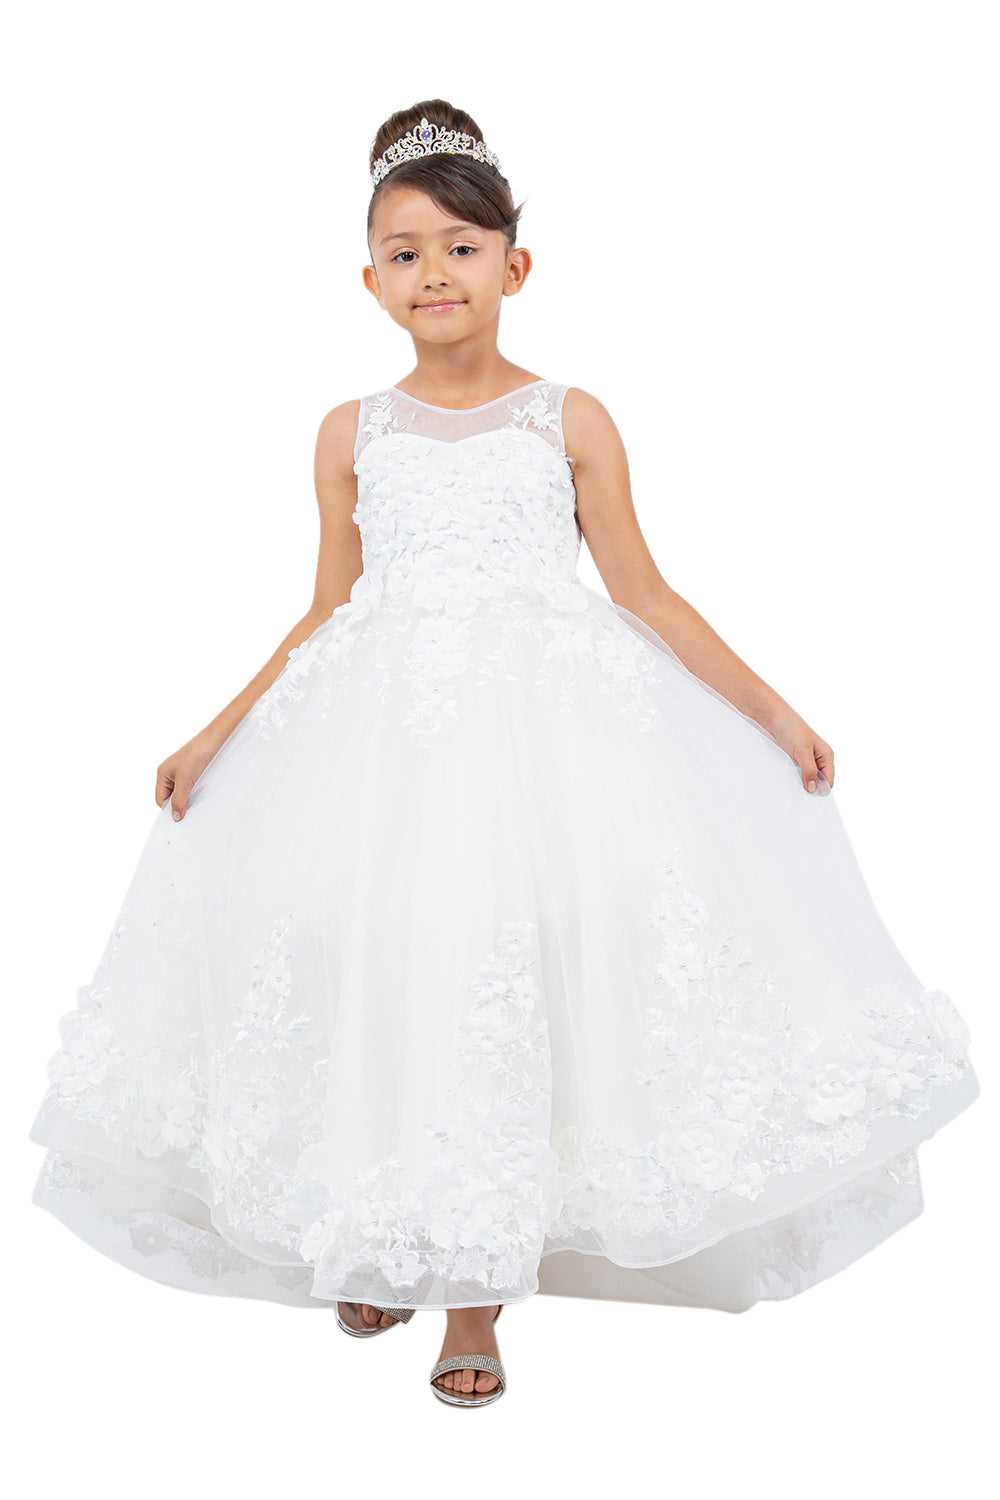 Girls Sleeveless High Low Gown by Cinderella Couture 9153